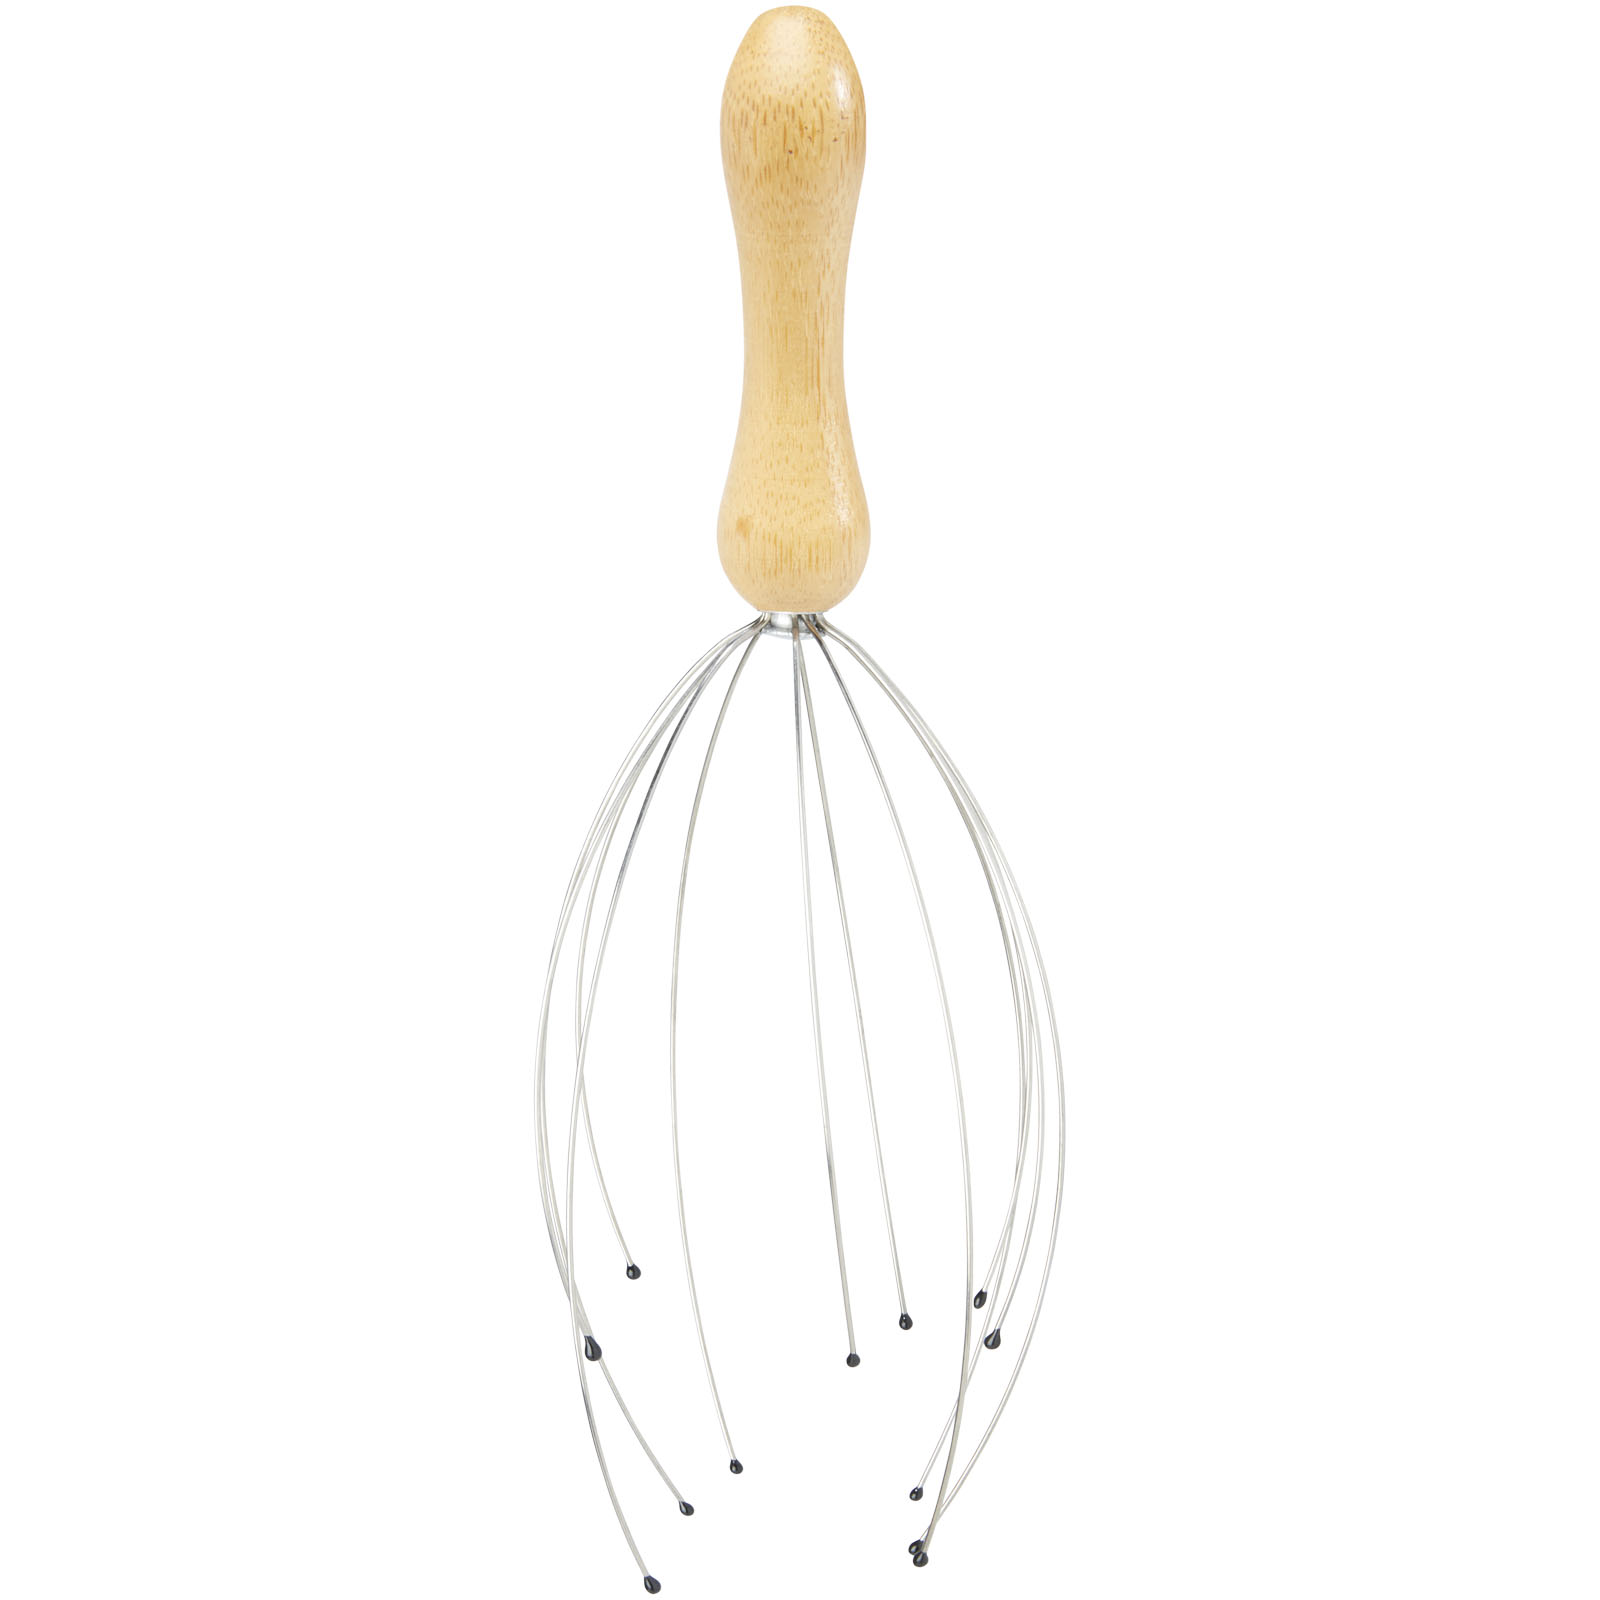 Personal Care - Hator bamboo head massager